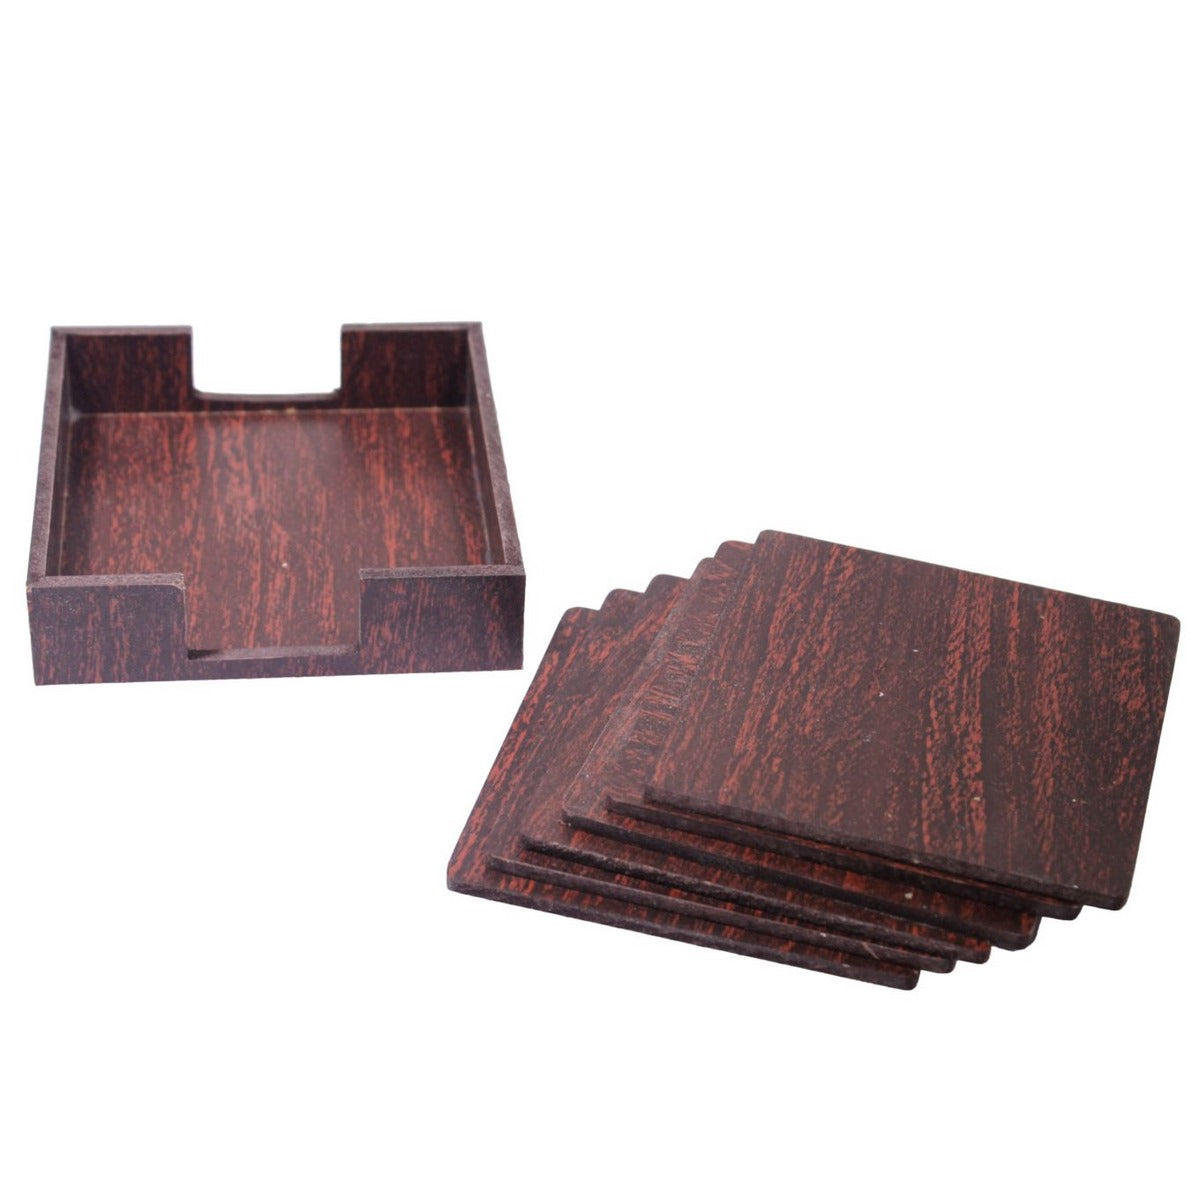 Set of 6 Dark Brown Square Wooden Tea Coaster - For Corporate Gifting, Office Use, Personal Use, Return Gift